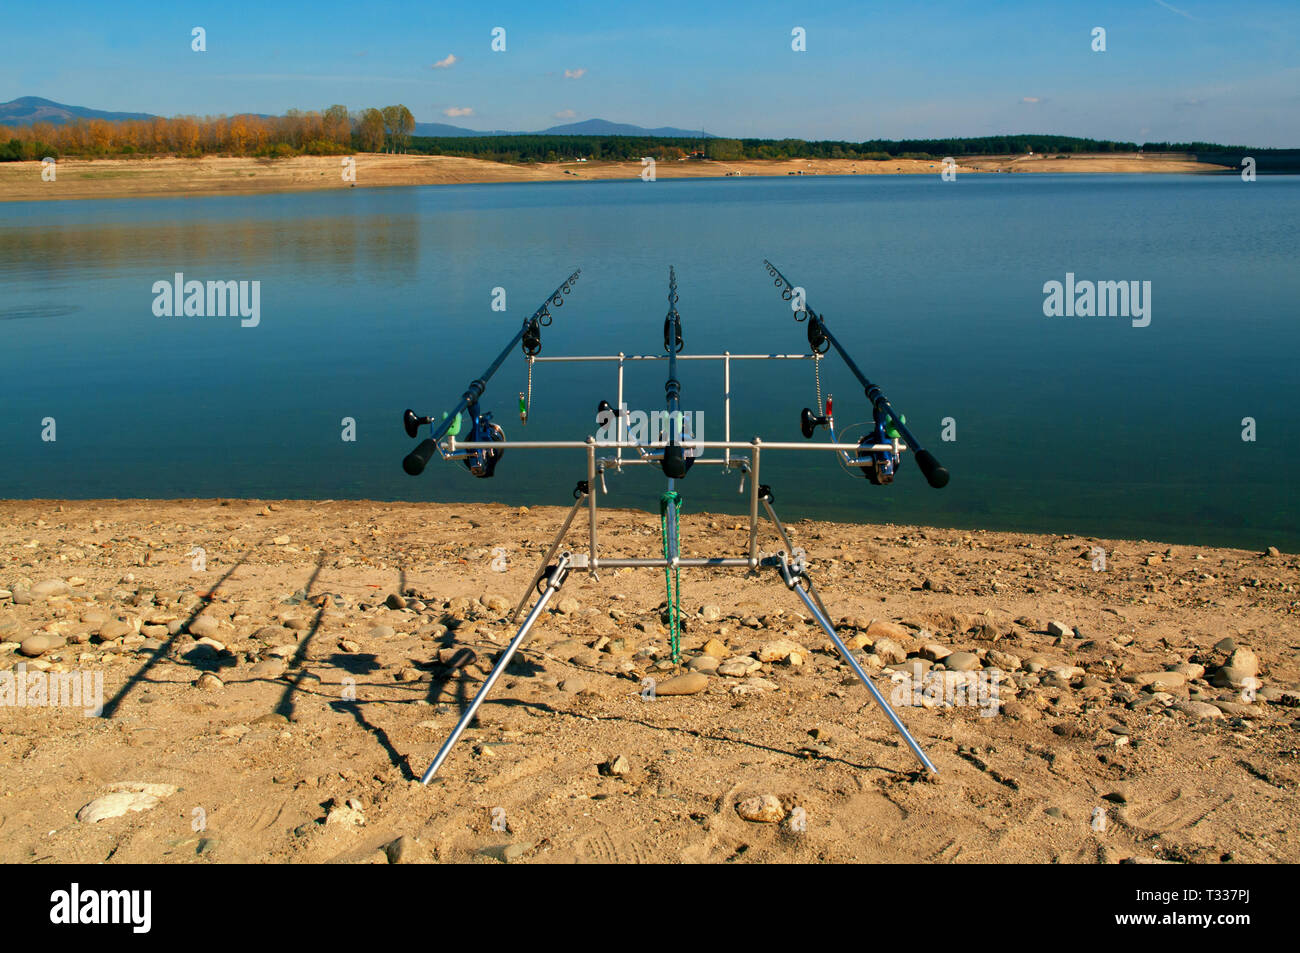 Swing fishing. Rods for carp fishing with a signaling close-up